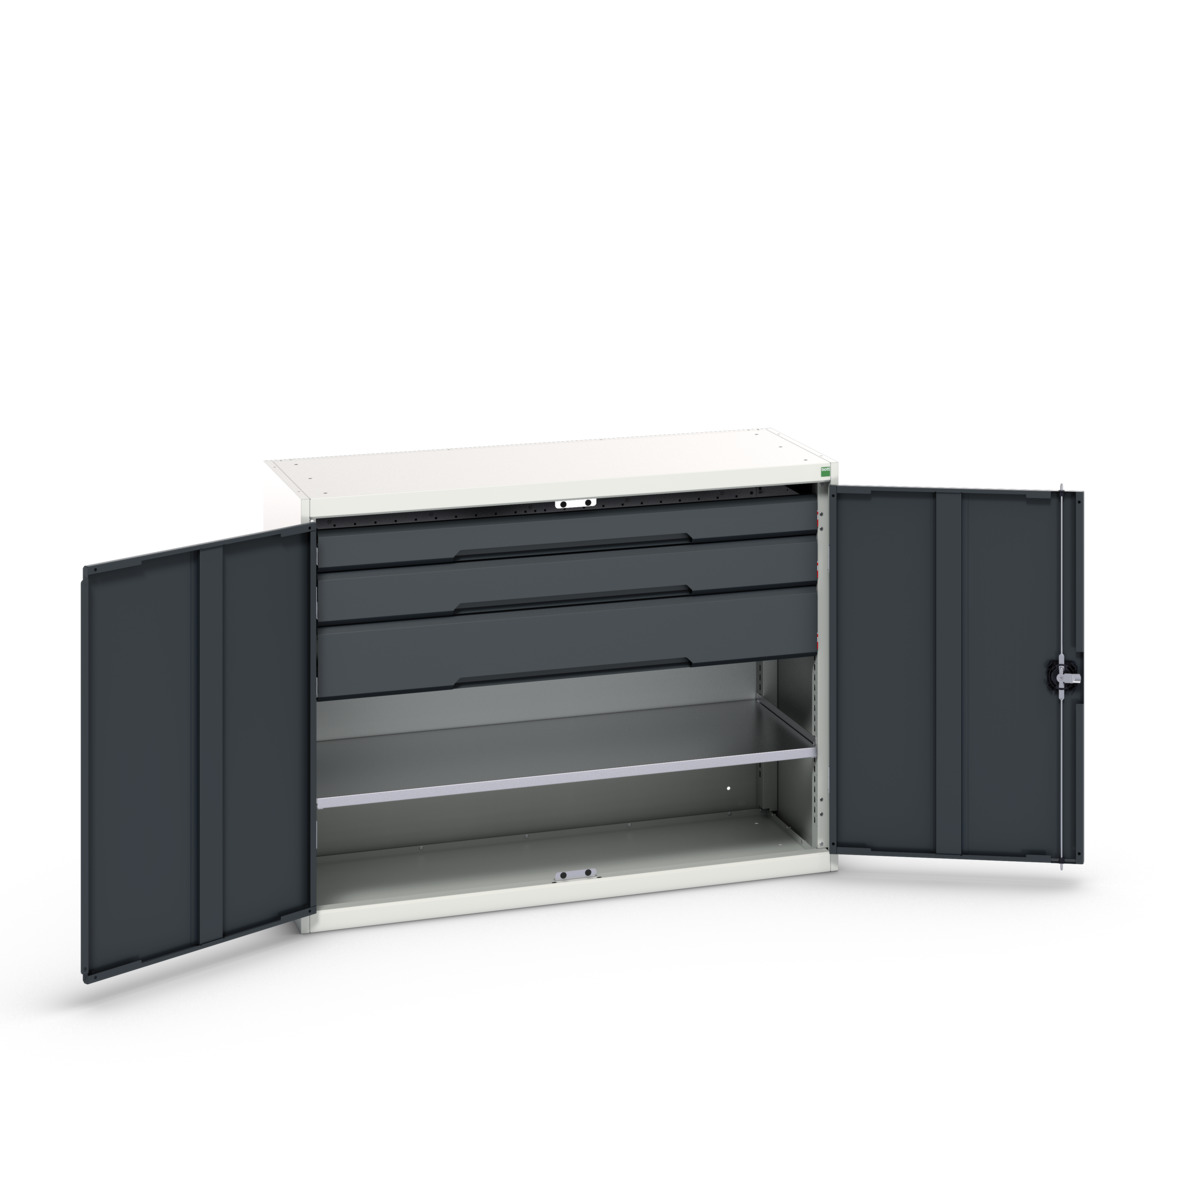 16926607.19 - verso kitted cupboard